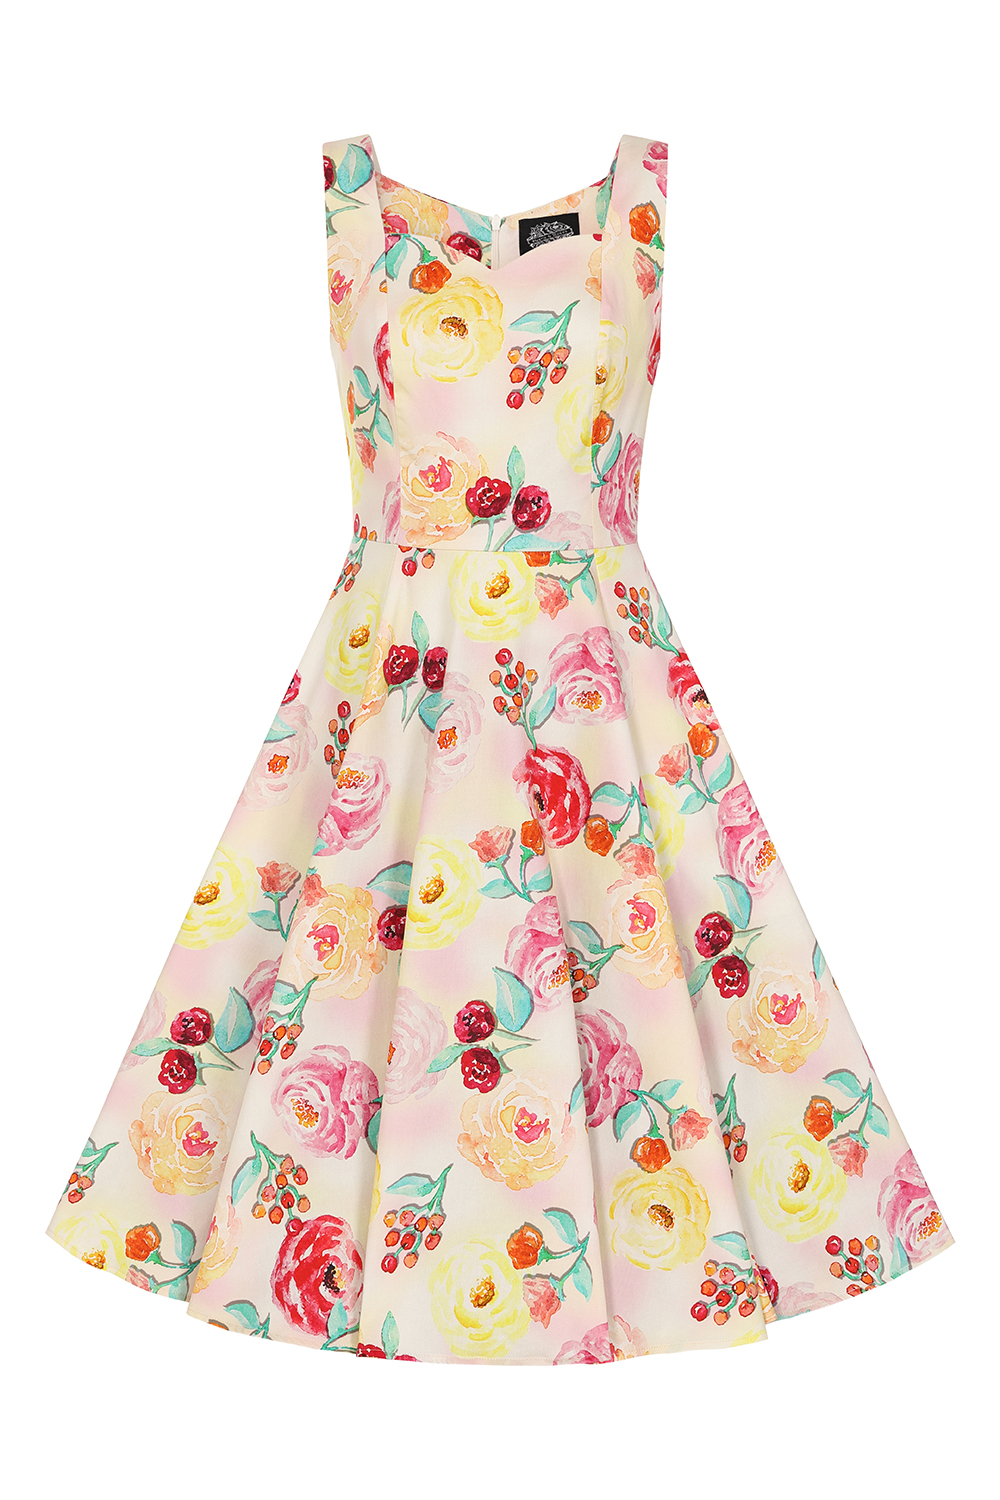 New Arrivals - Hearts & Roses London